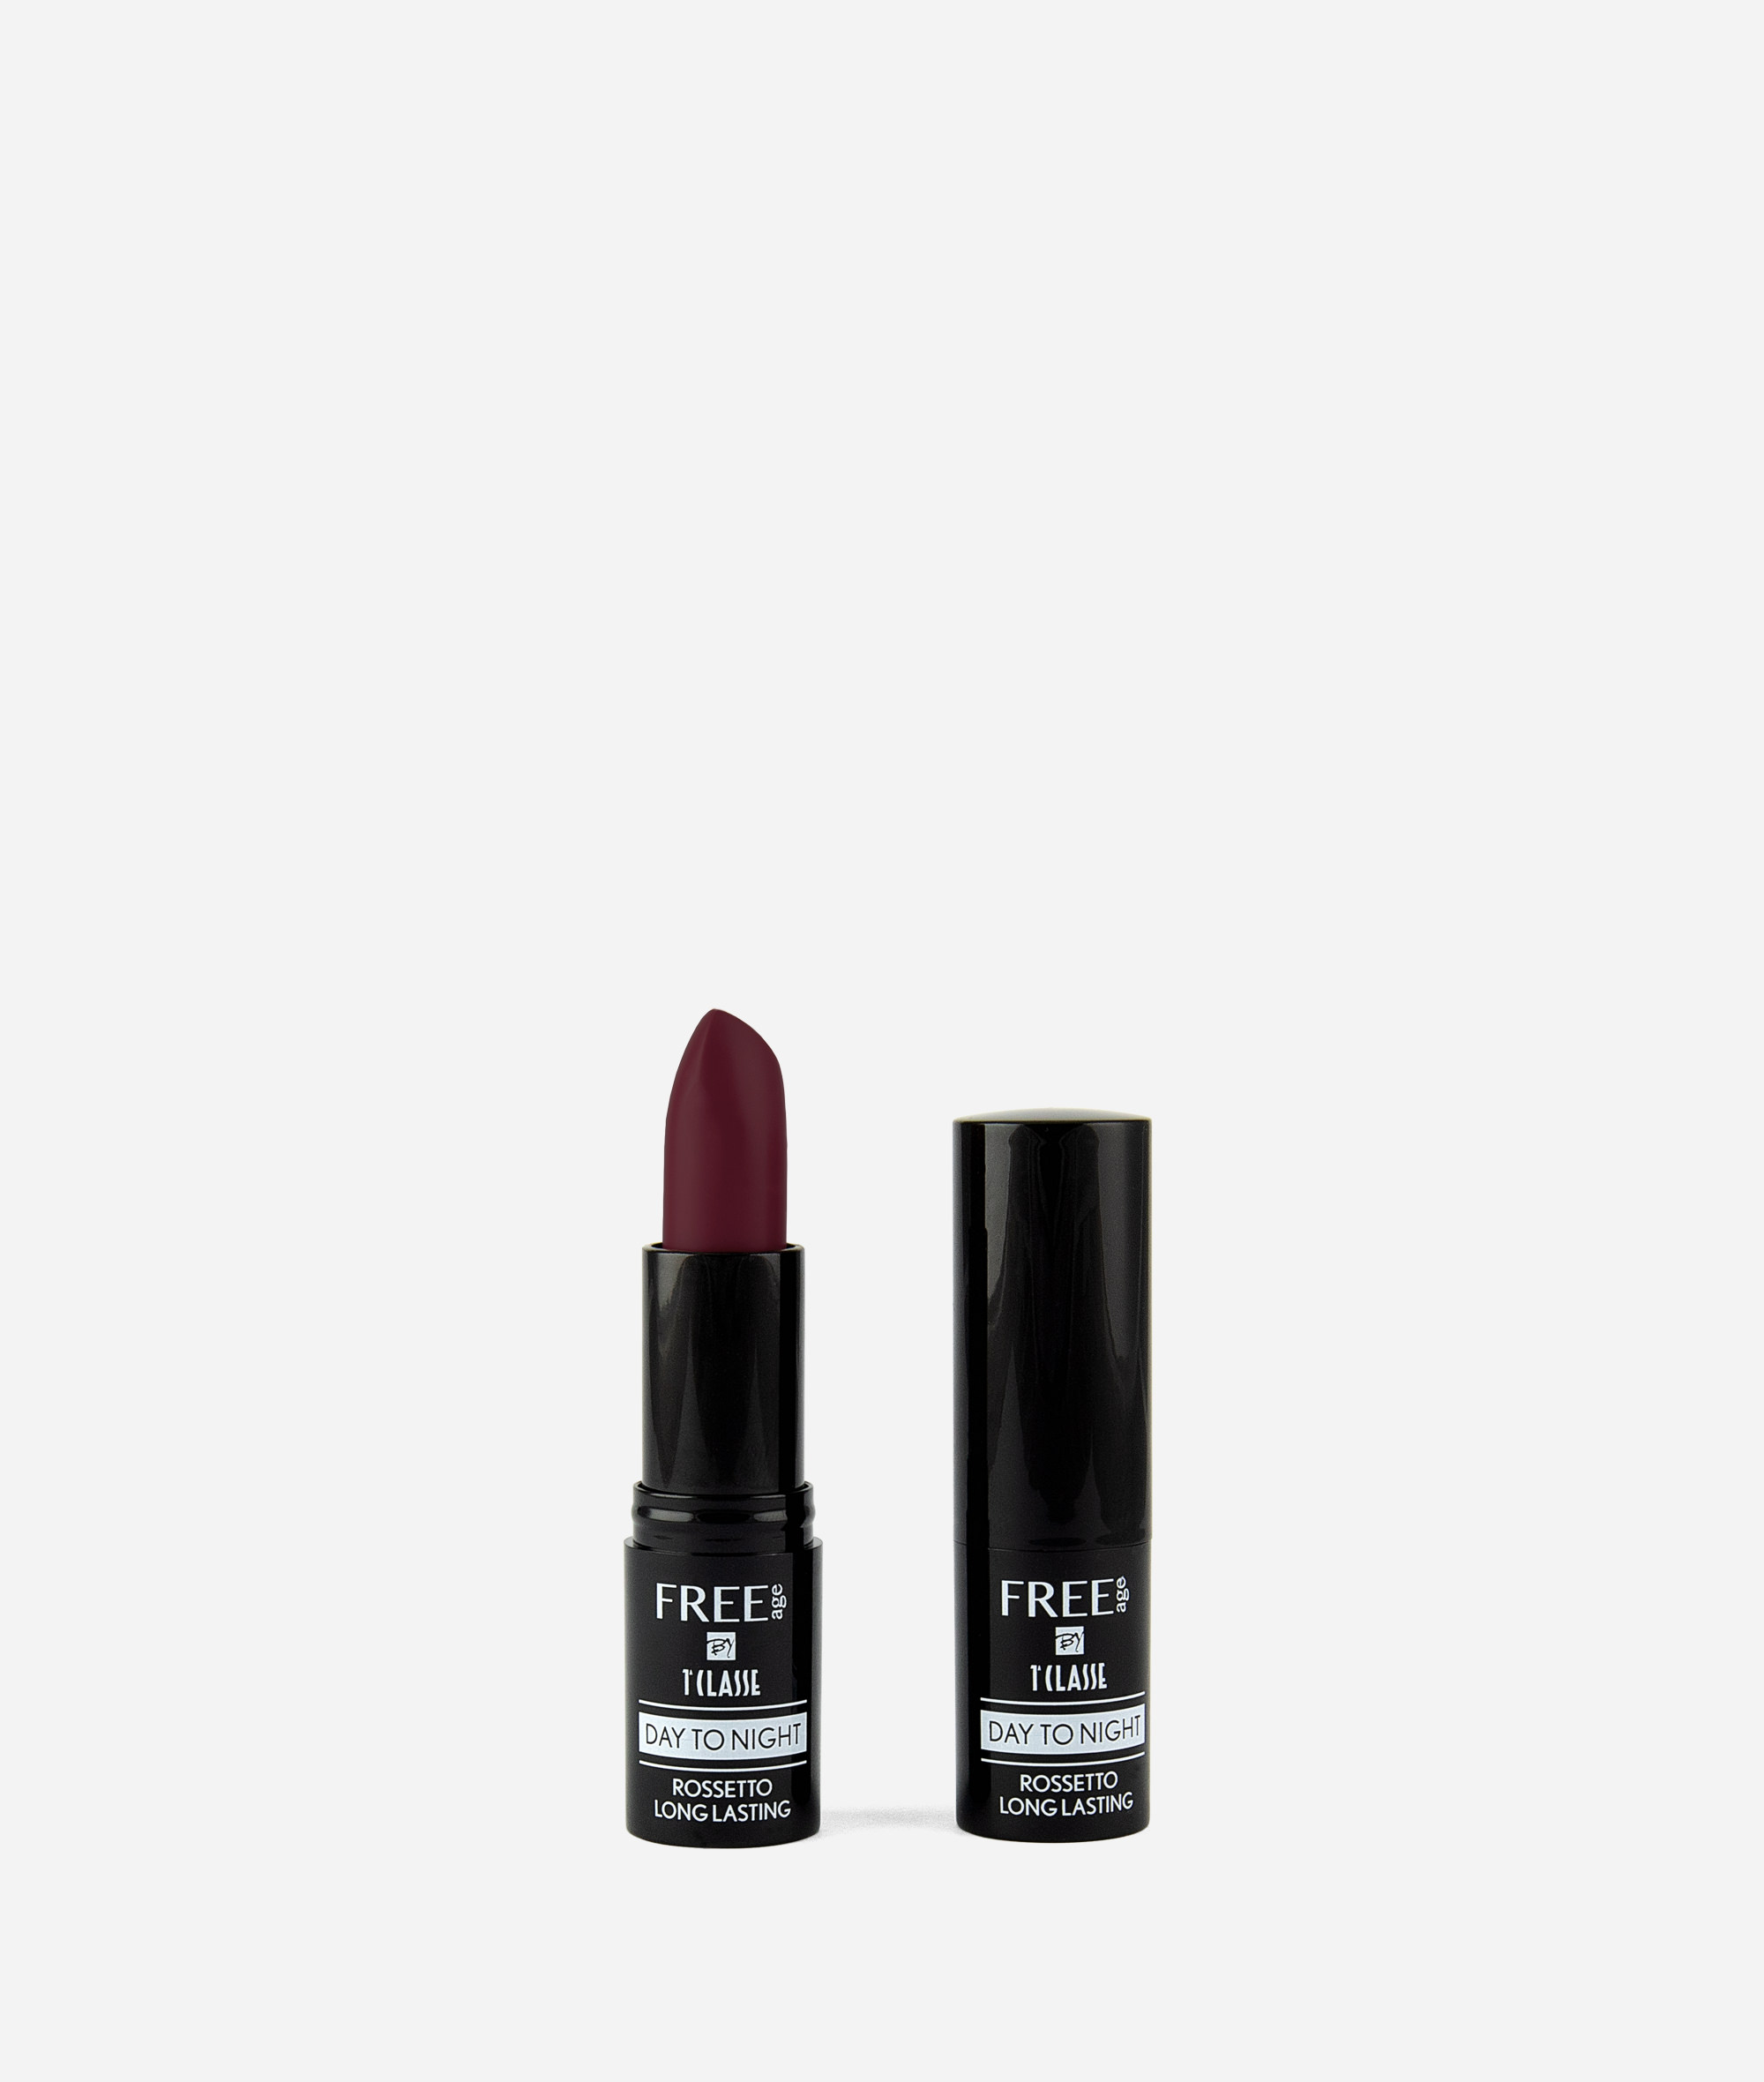 Day to Night Rossetto Bordeaux